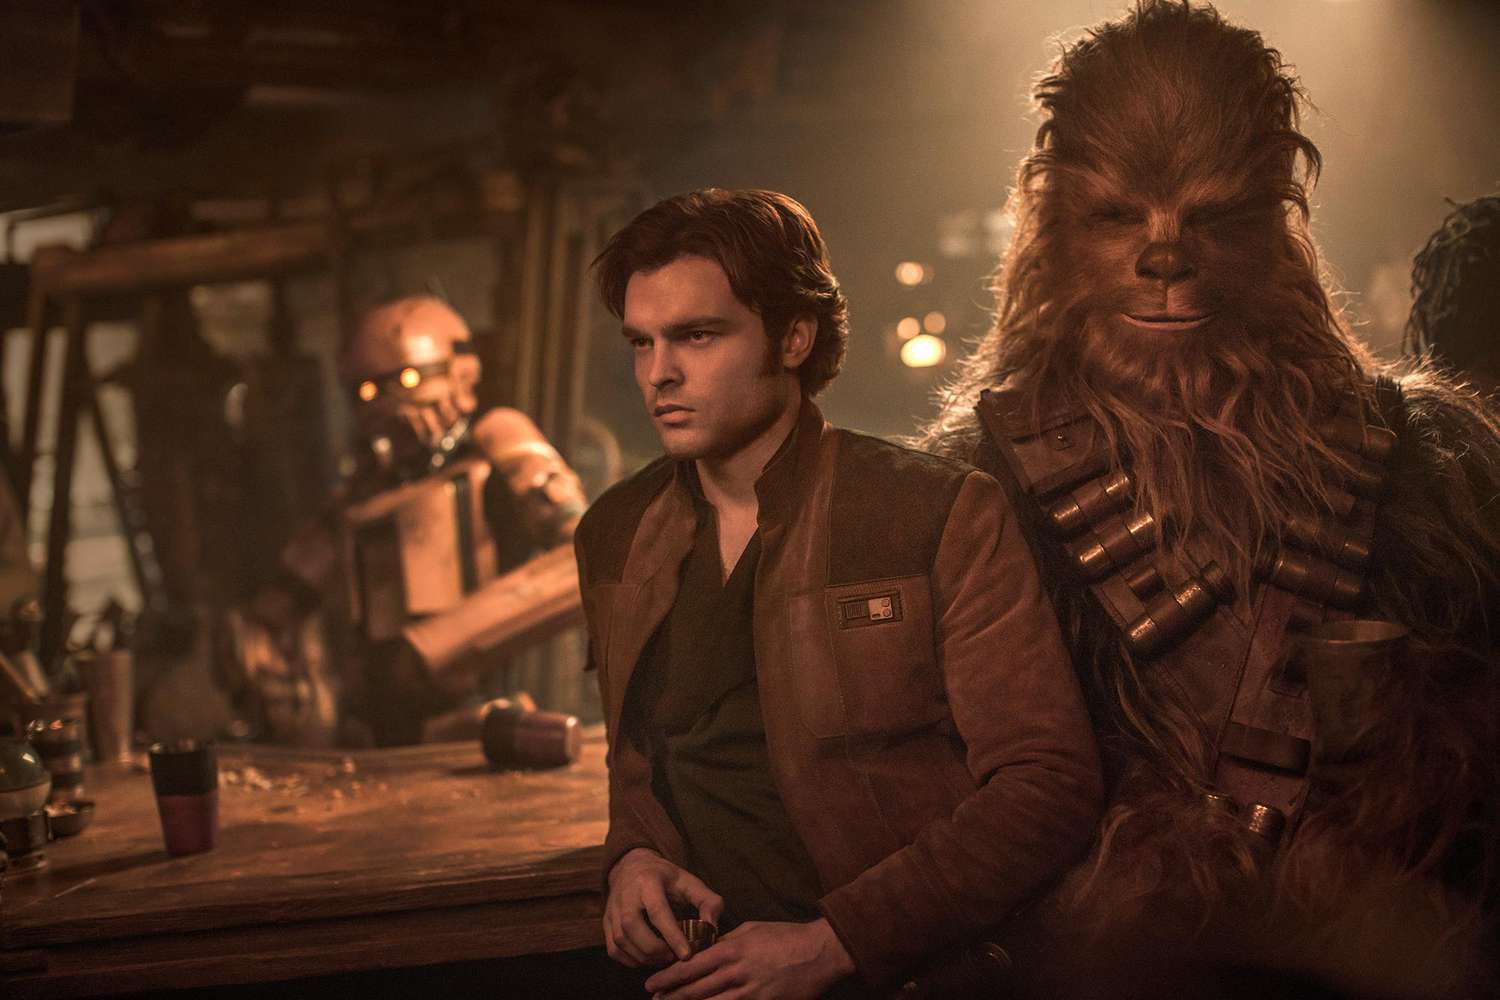 ‘Solo’ sequel not ‘a Lucasfilm priority,’ says Ron Howard, but ‘never say never’